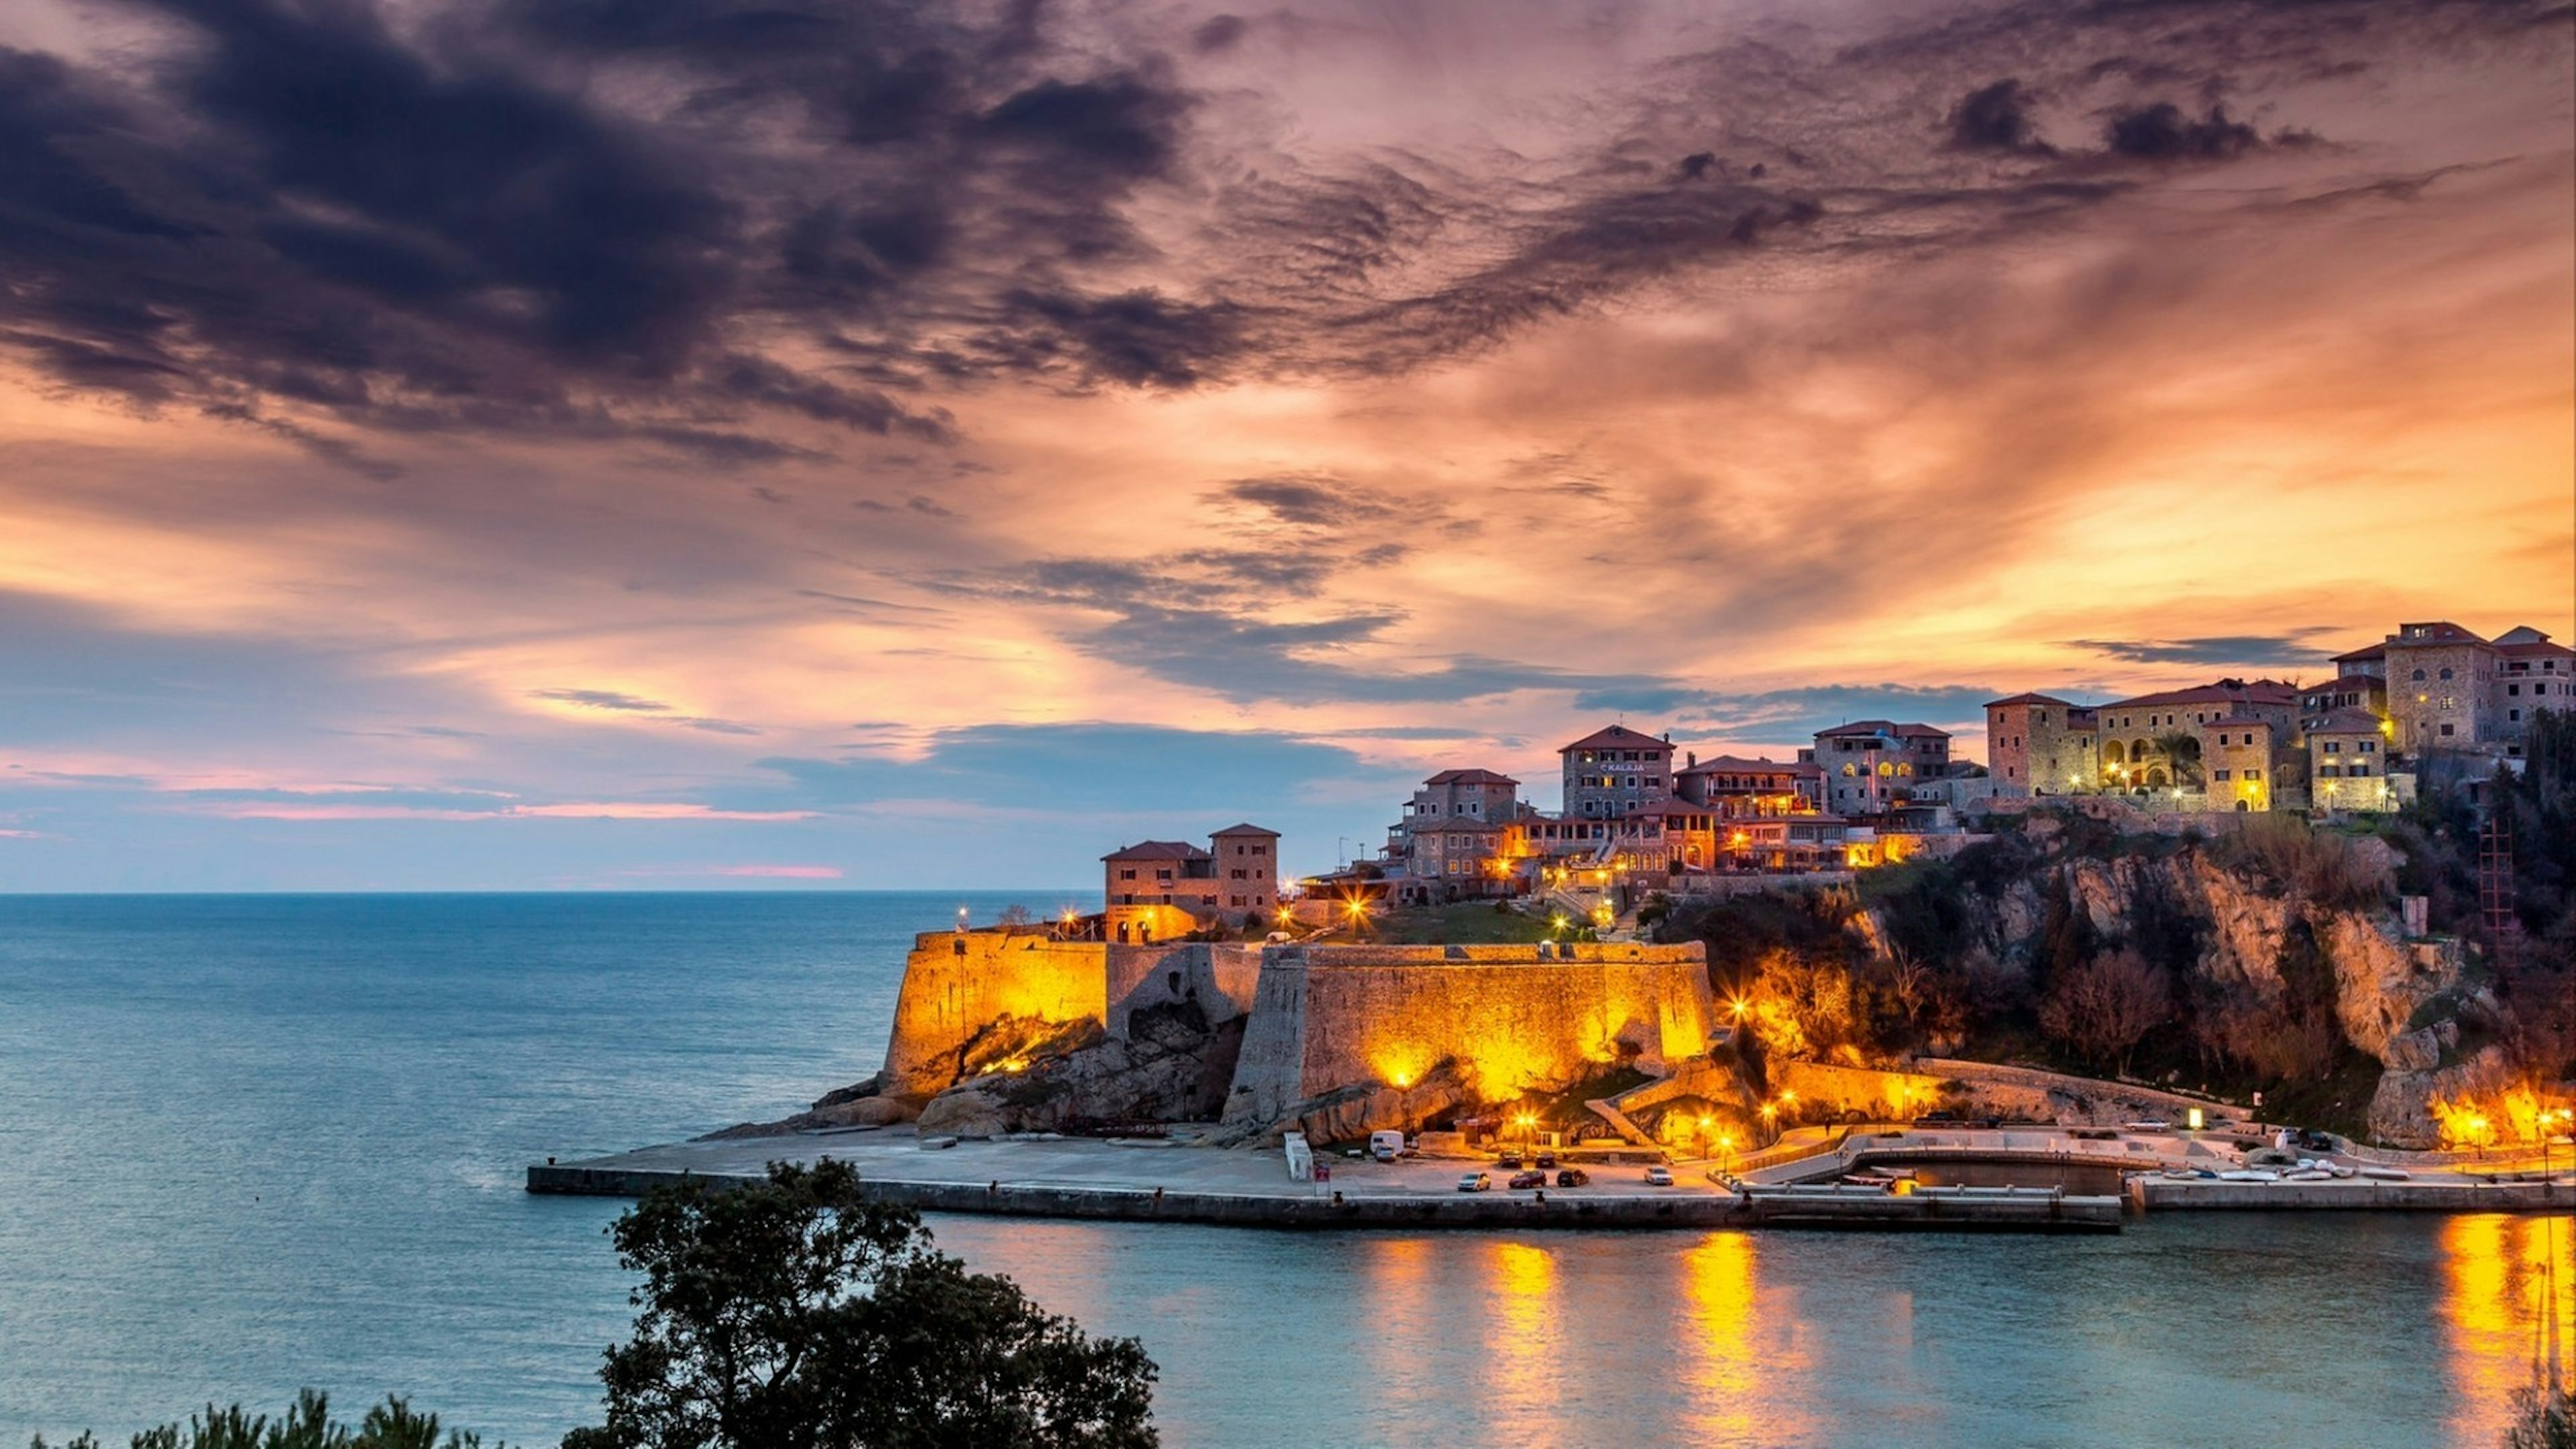 Ulcinj old town fortress with purple after sunset light. Adriatic sea at night in Montenegro.